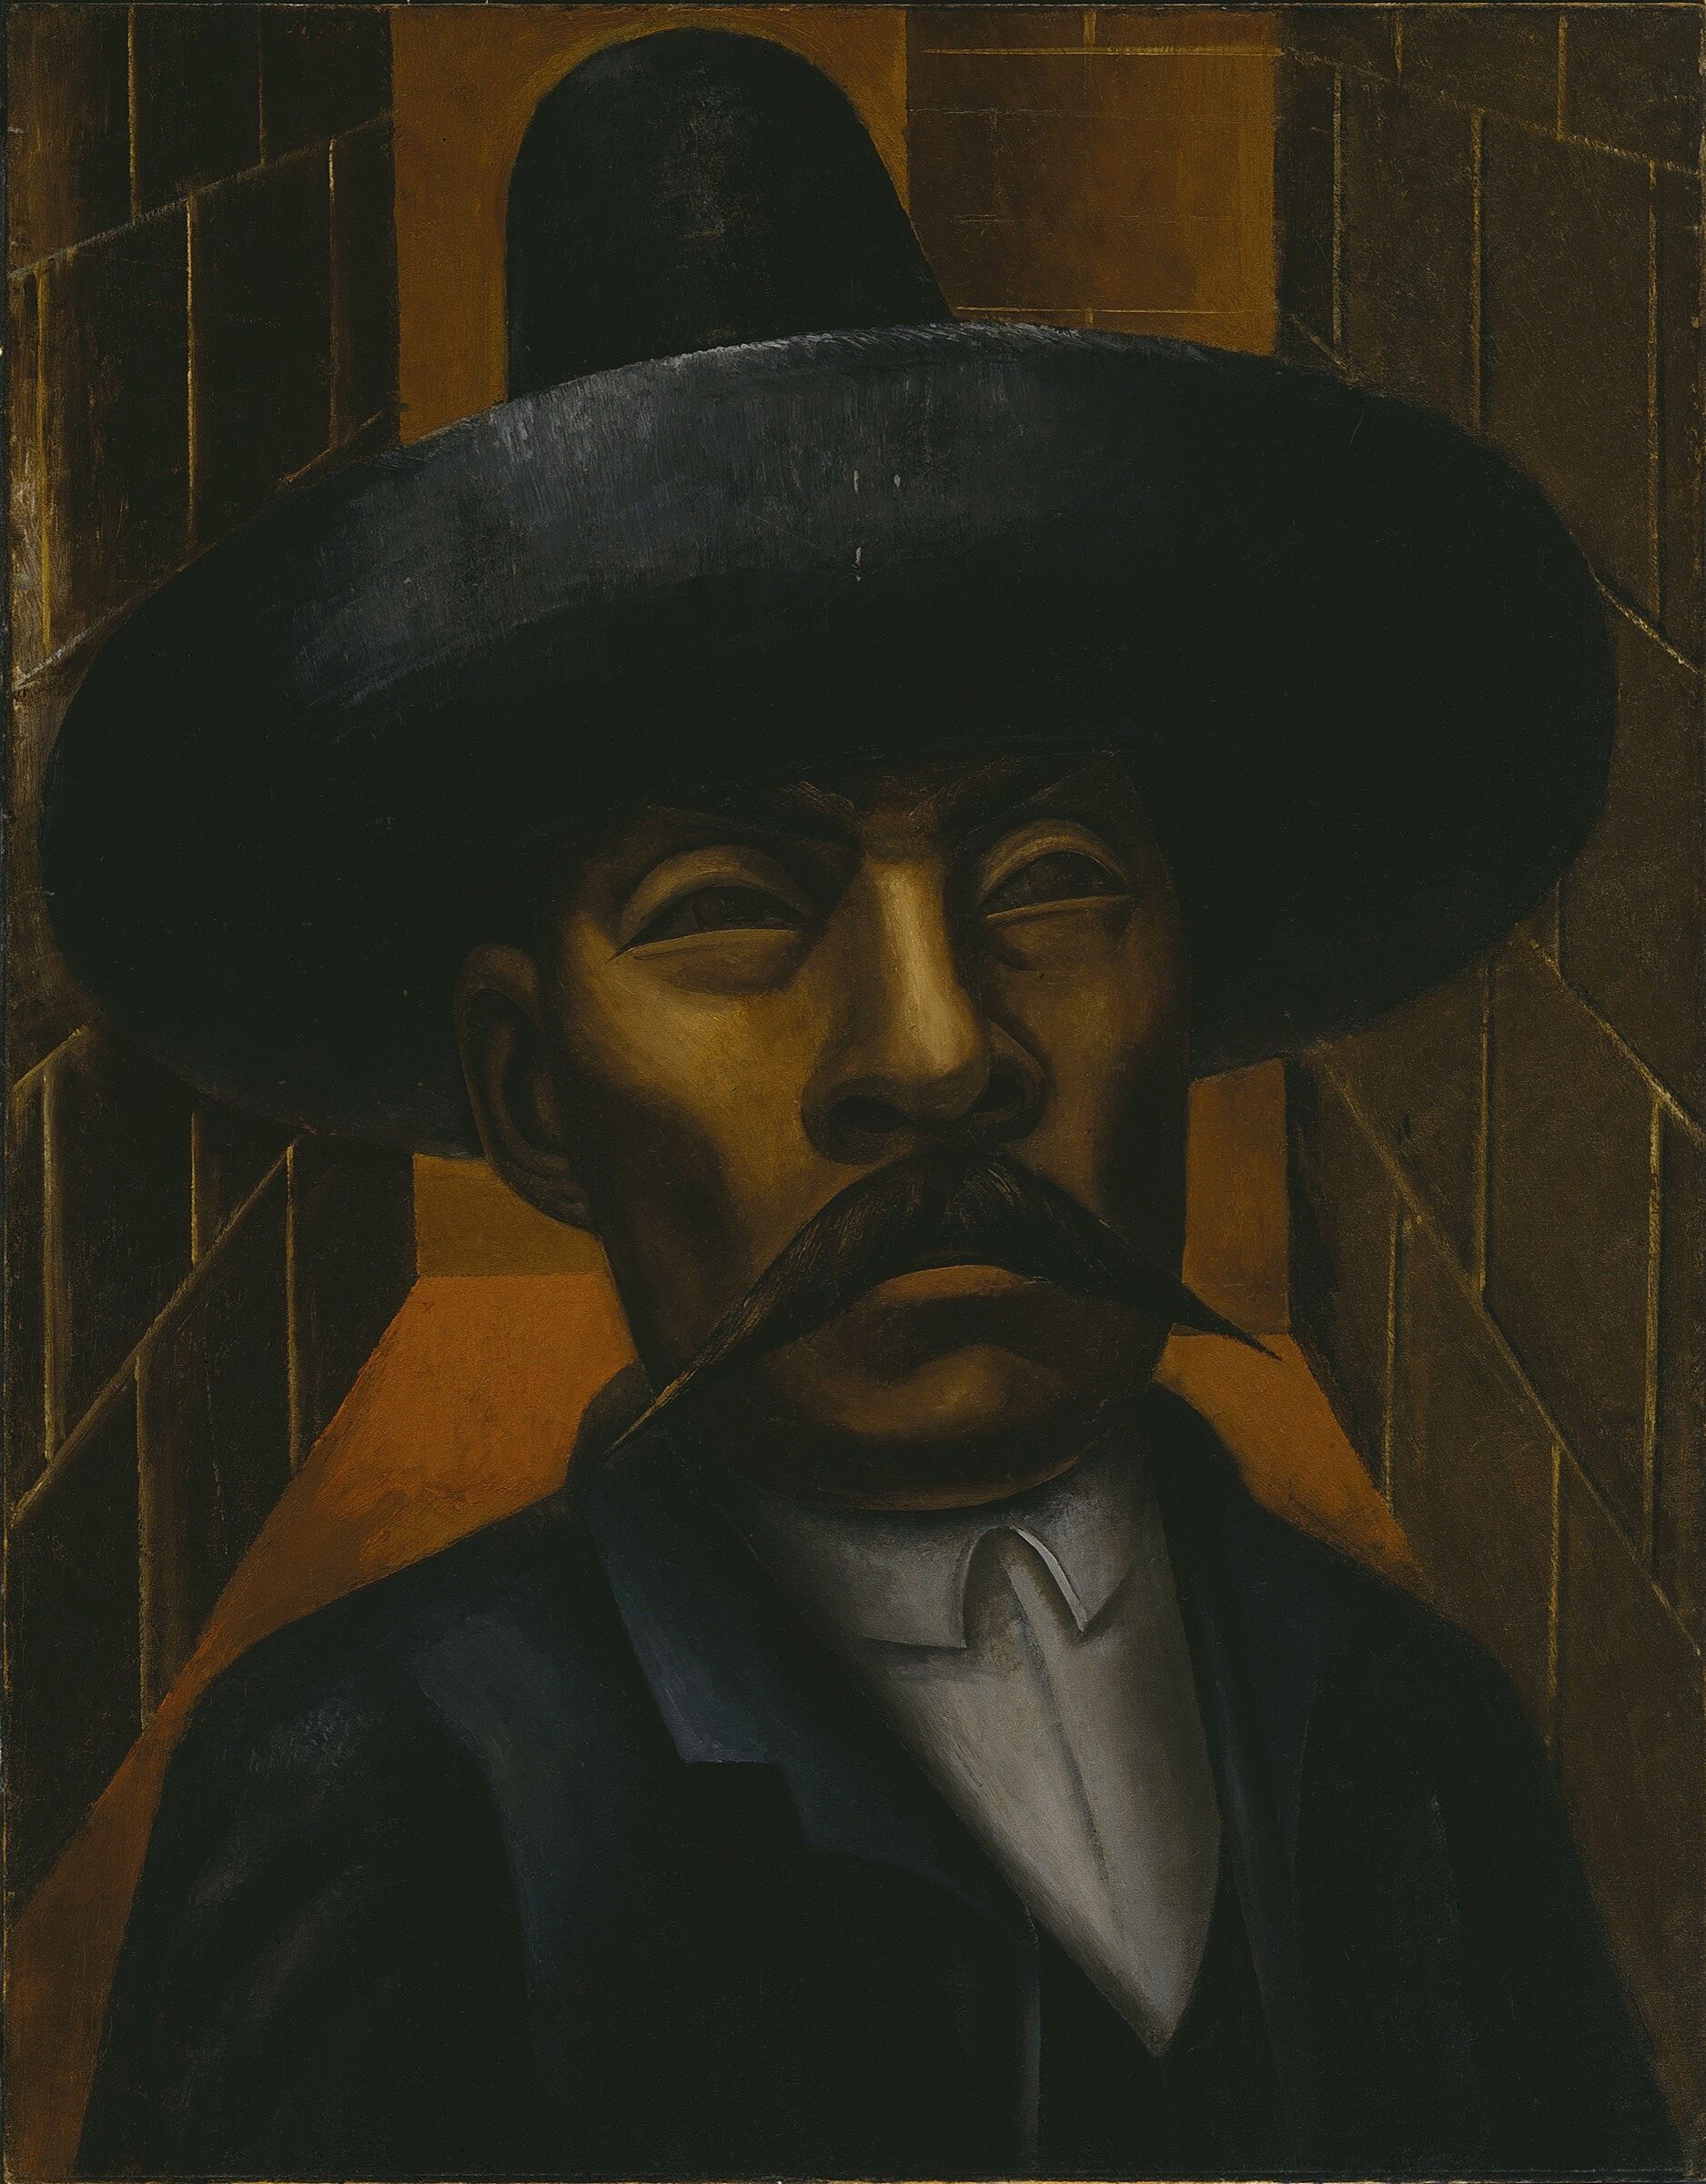 A painting depicting a man with a black hat and a mustache.